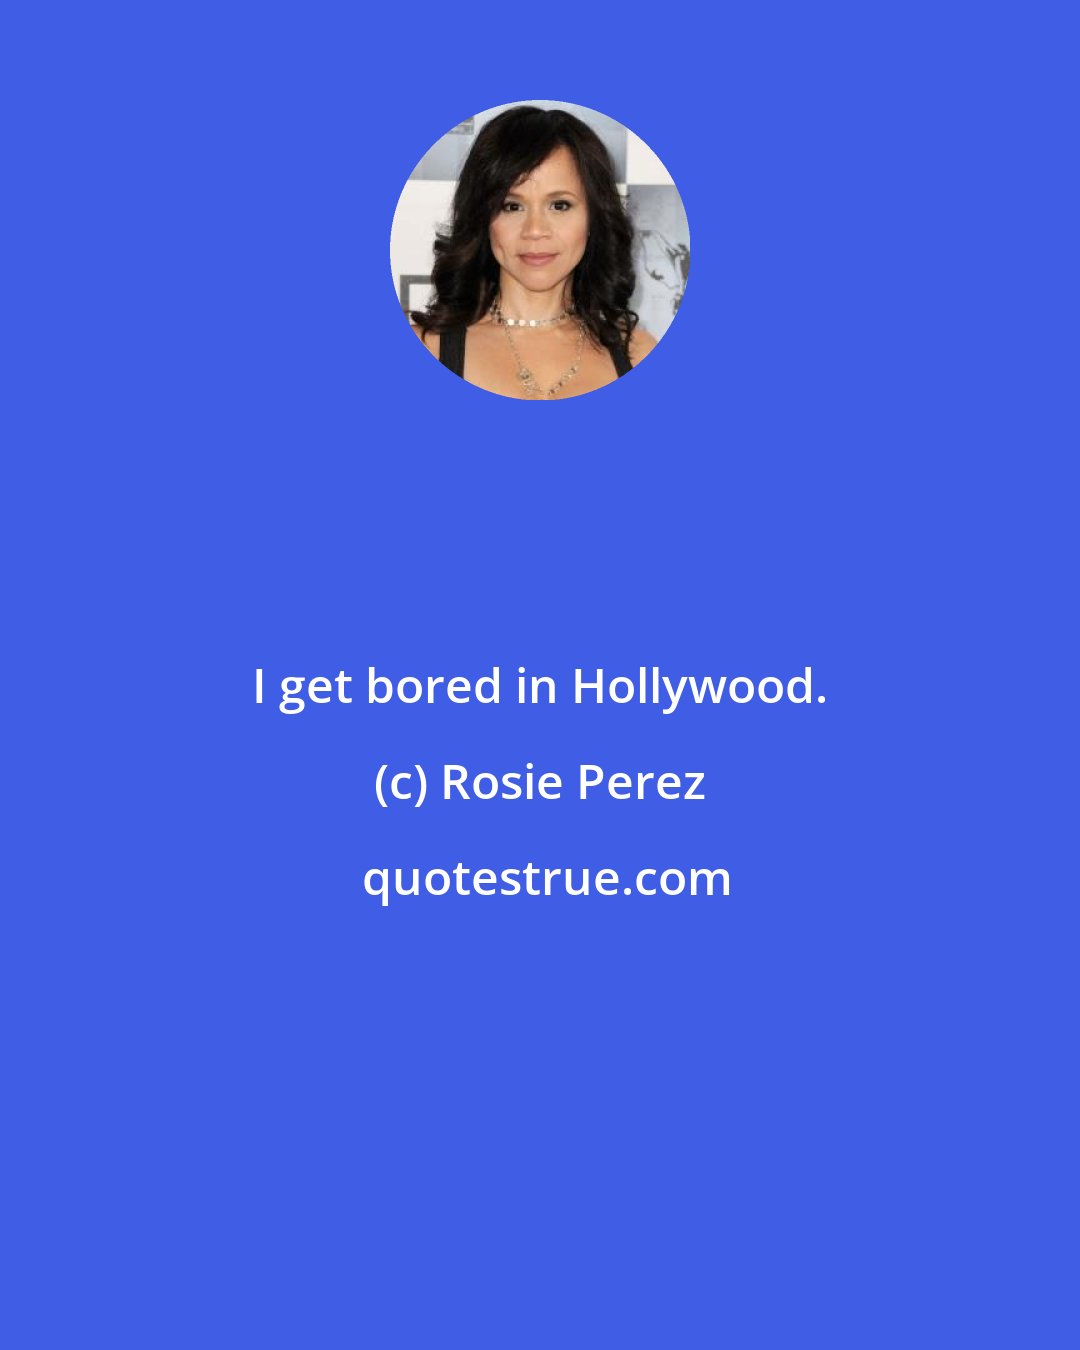 Rosie Perez: I get bored in Hollywood.